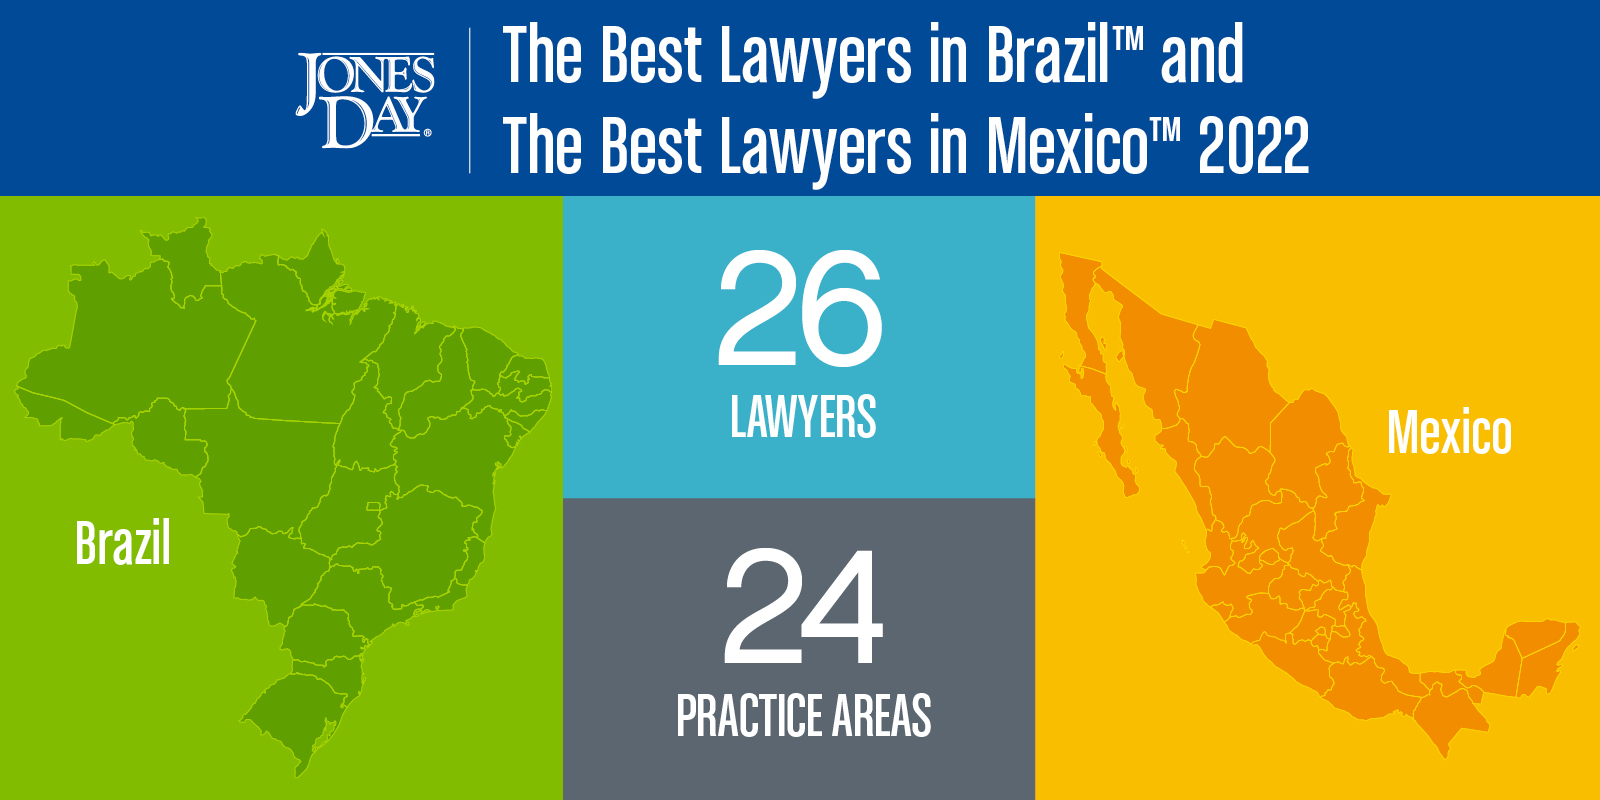 The Best Lawyers in Brazil and Mexico Infographic